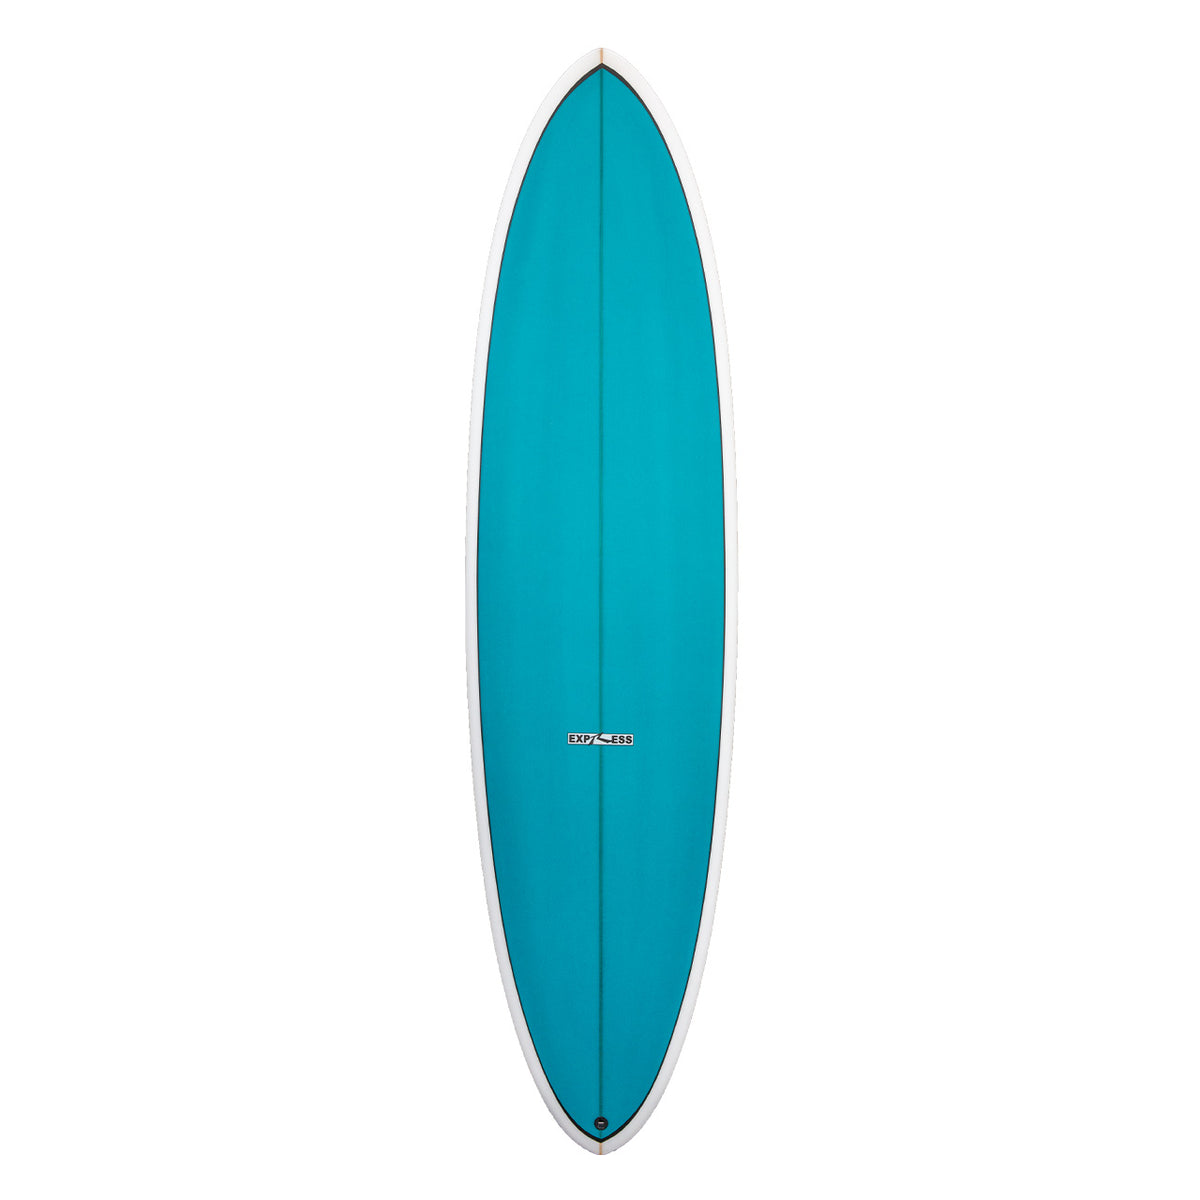 Express Midlength Surfboard - Teal - Deck -Rusty Surfboards 